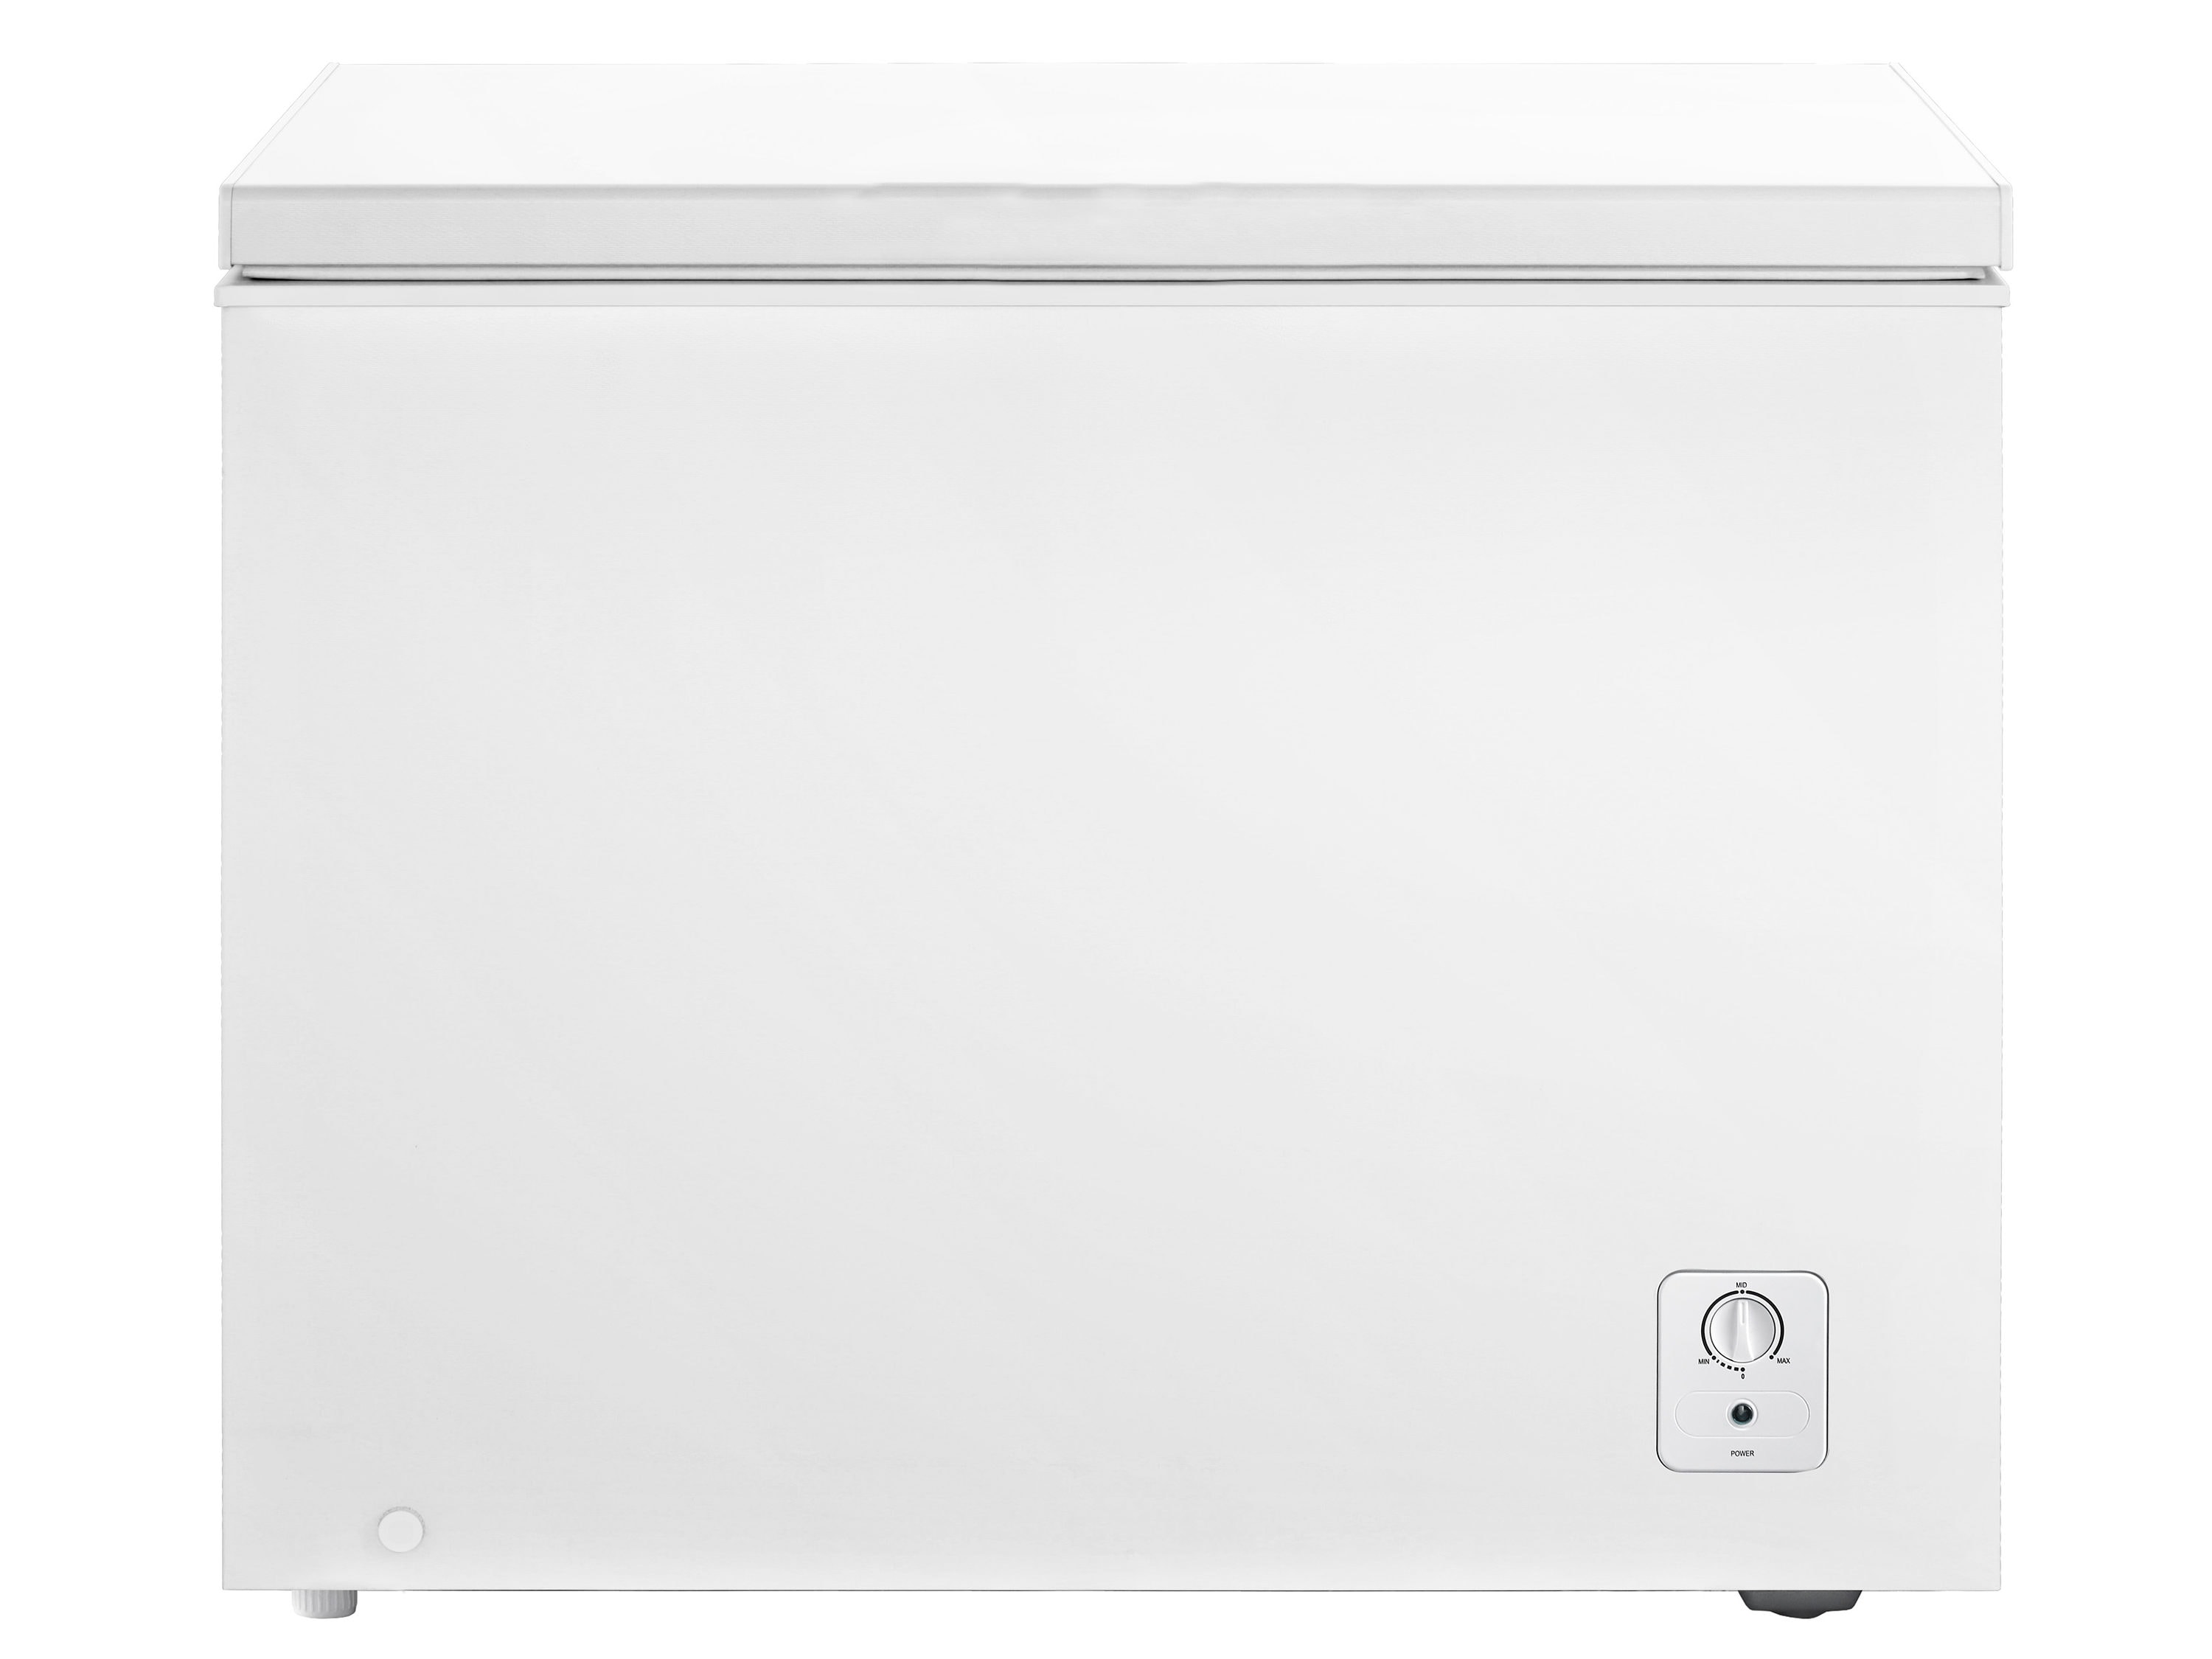 Hisense 8.7-cu ft Manual Defrost Chest Freezer (White) in the 